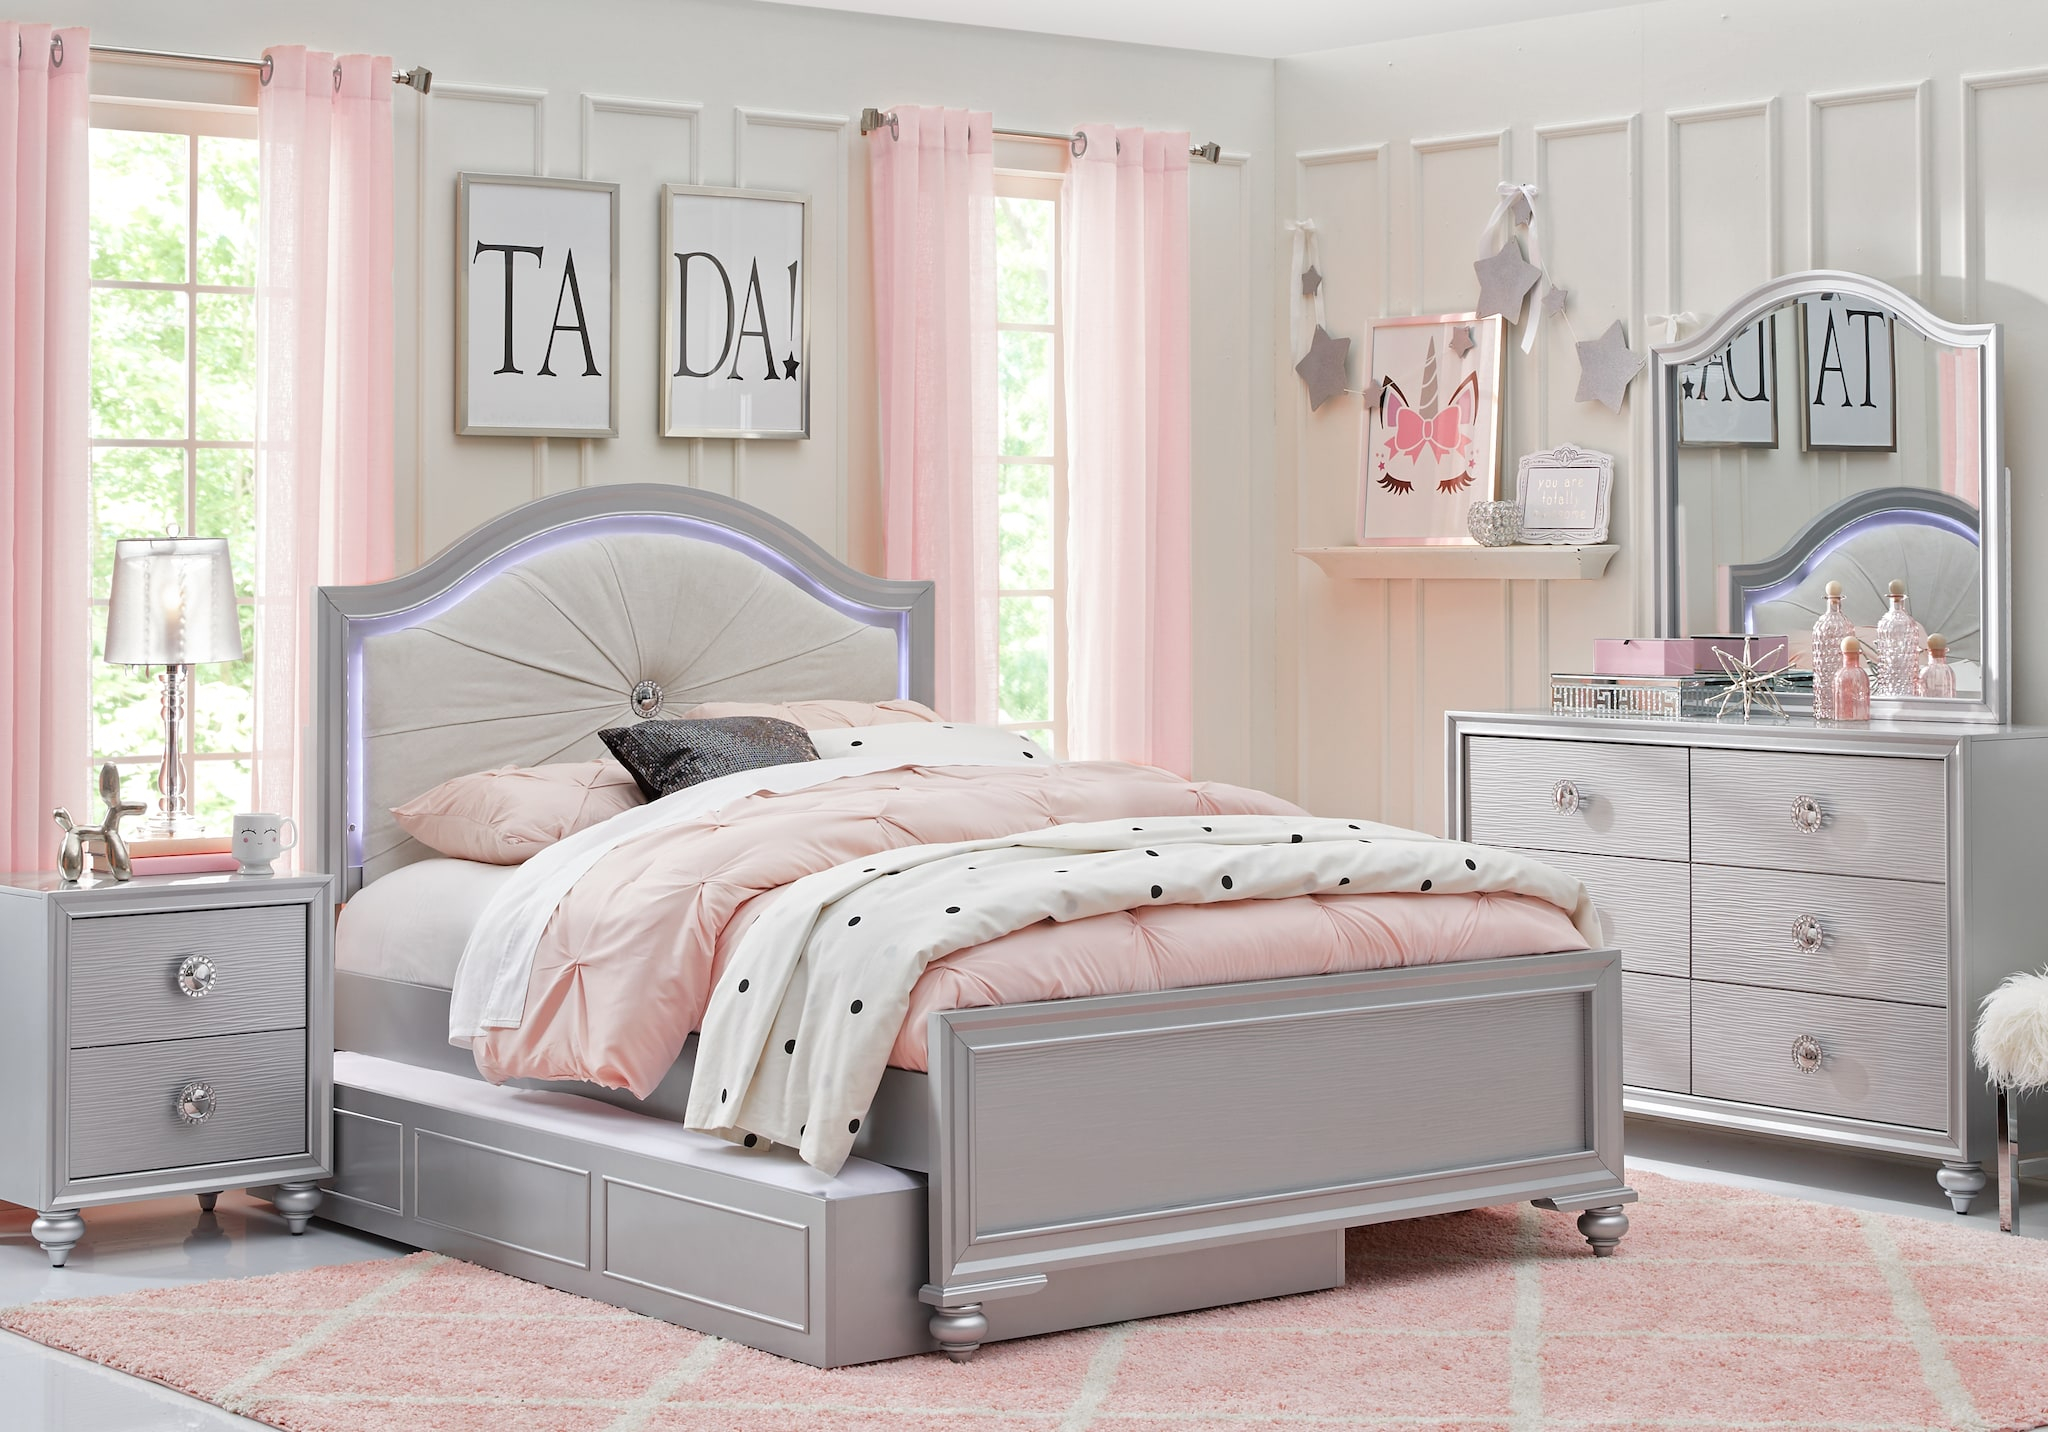 Girls Bedroom Sets Suitable Combine With Bedroom Sets For Girls within sizing 2048 X 1432